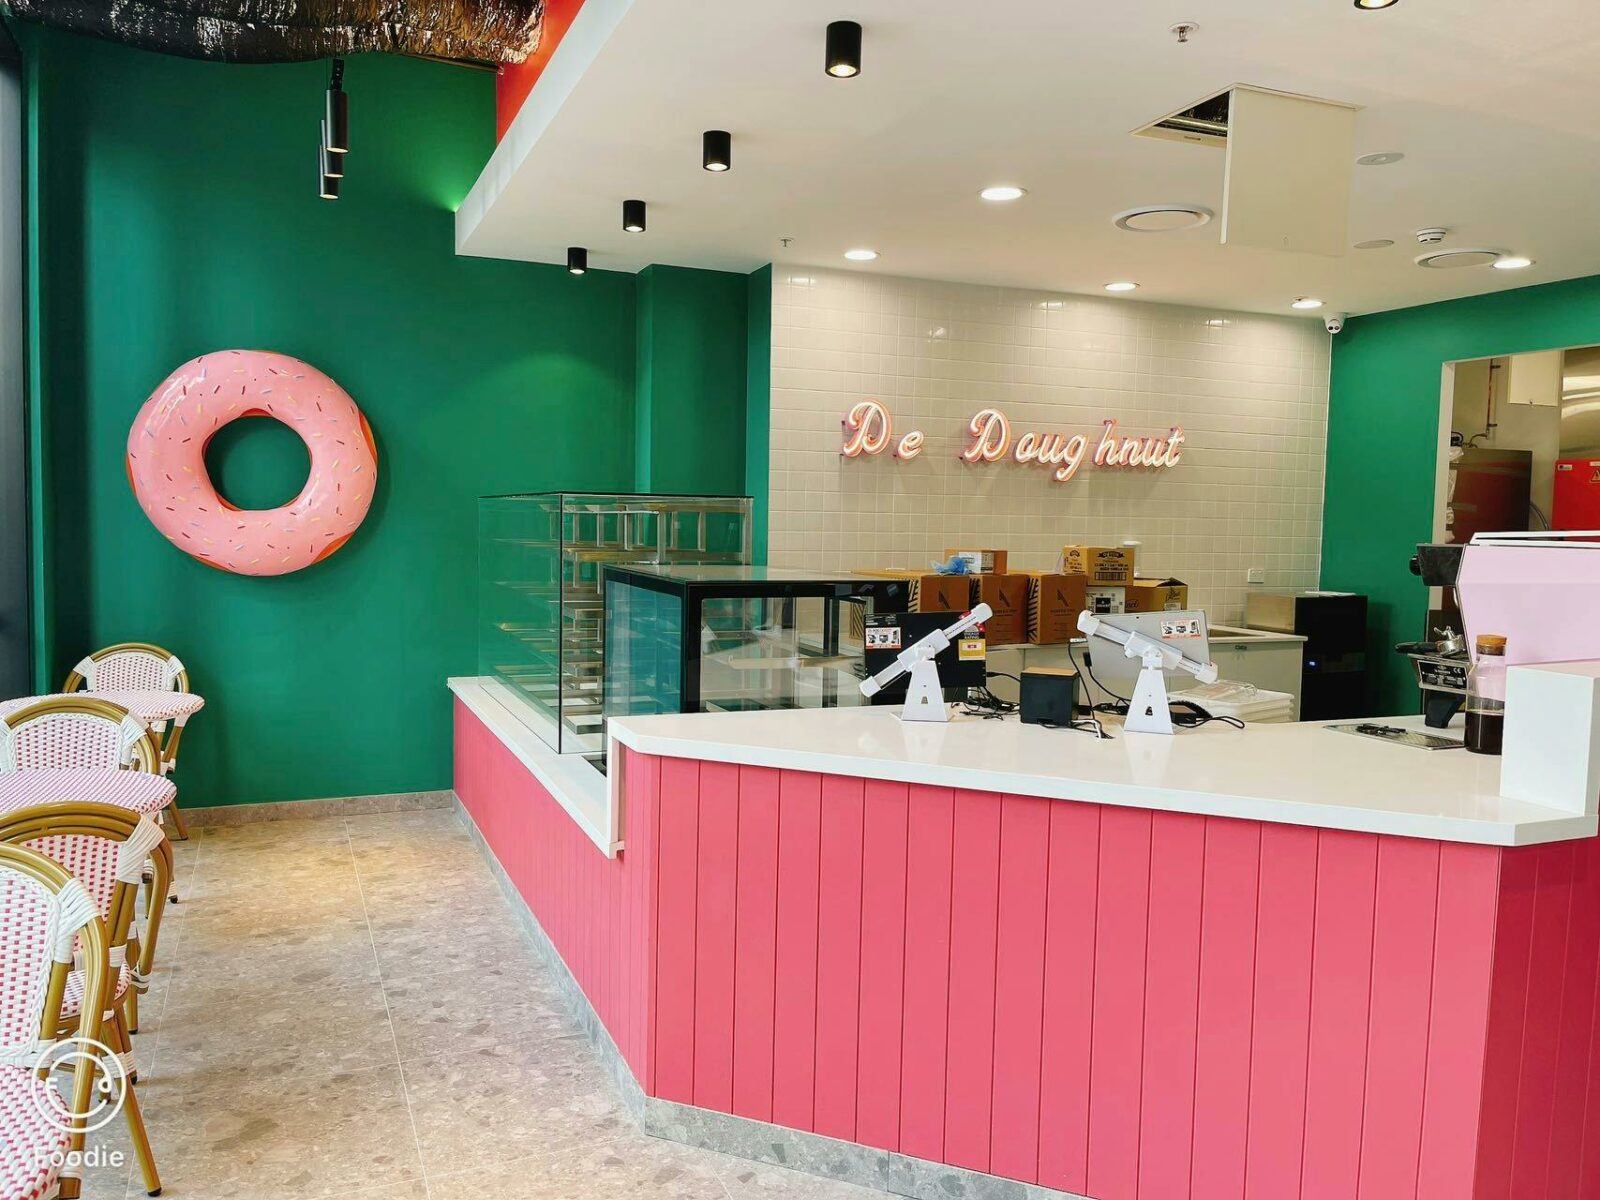 De Doughnut is a place for the visitor to enjoy their doughnut and coffee in Canberra